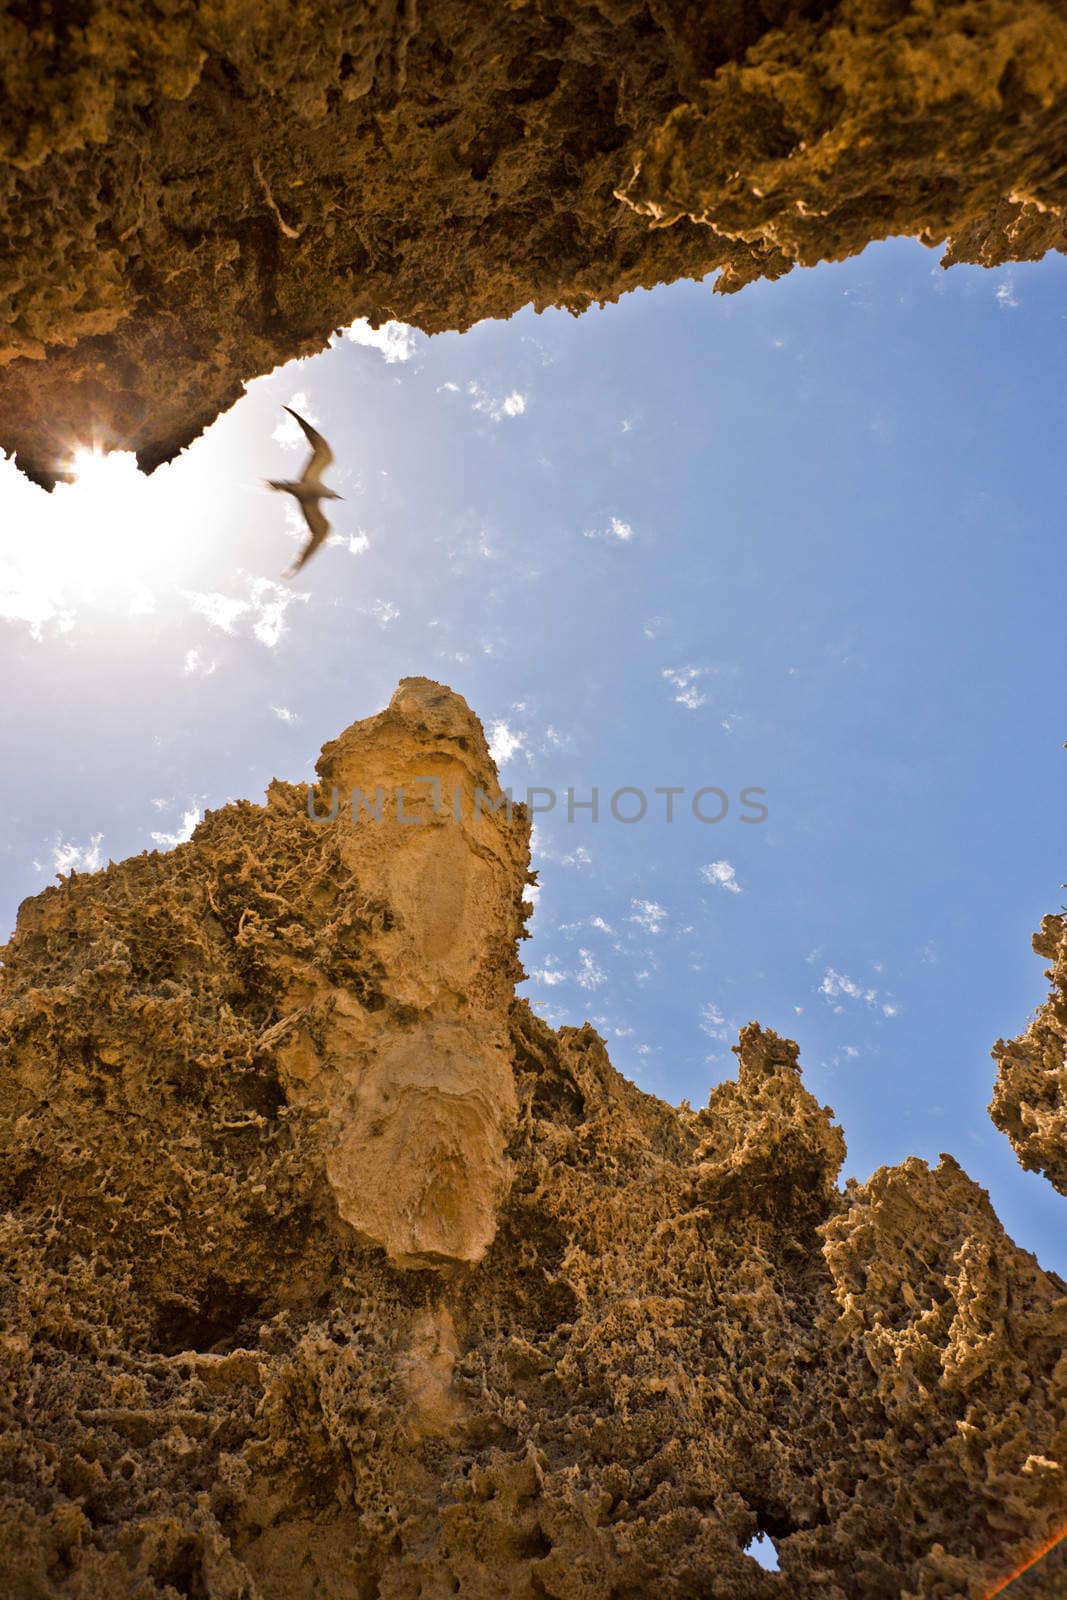 Serene image of a seagull flying between rocks at a beach.